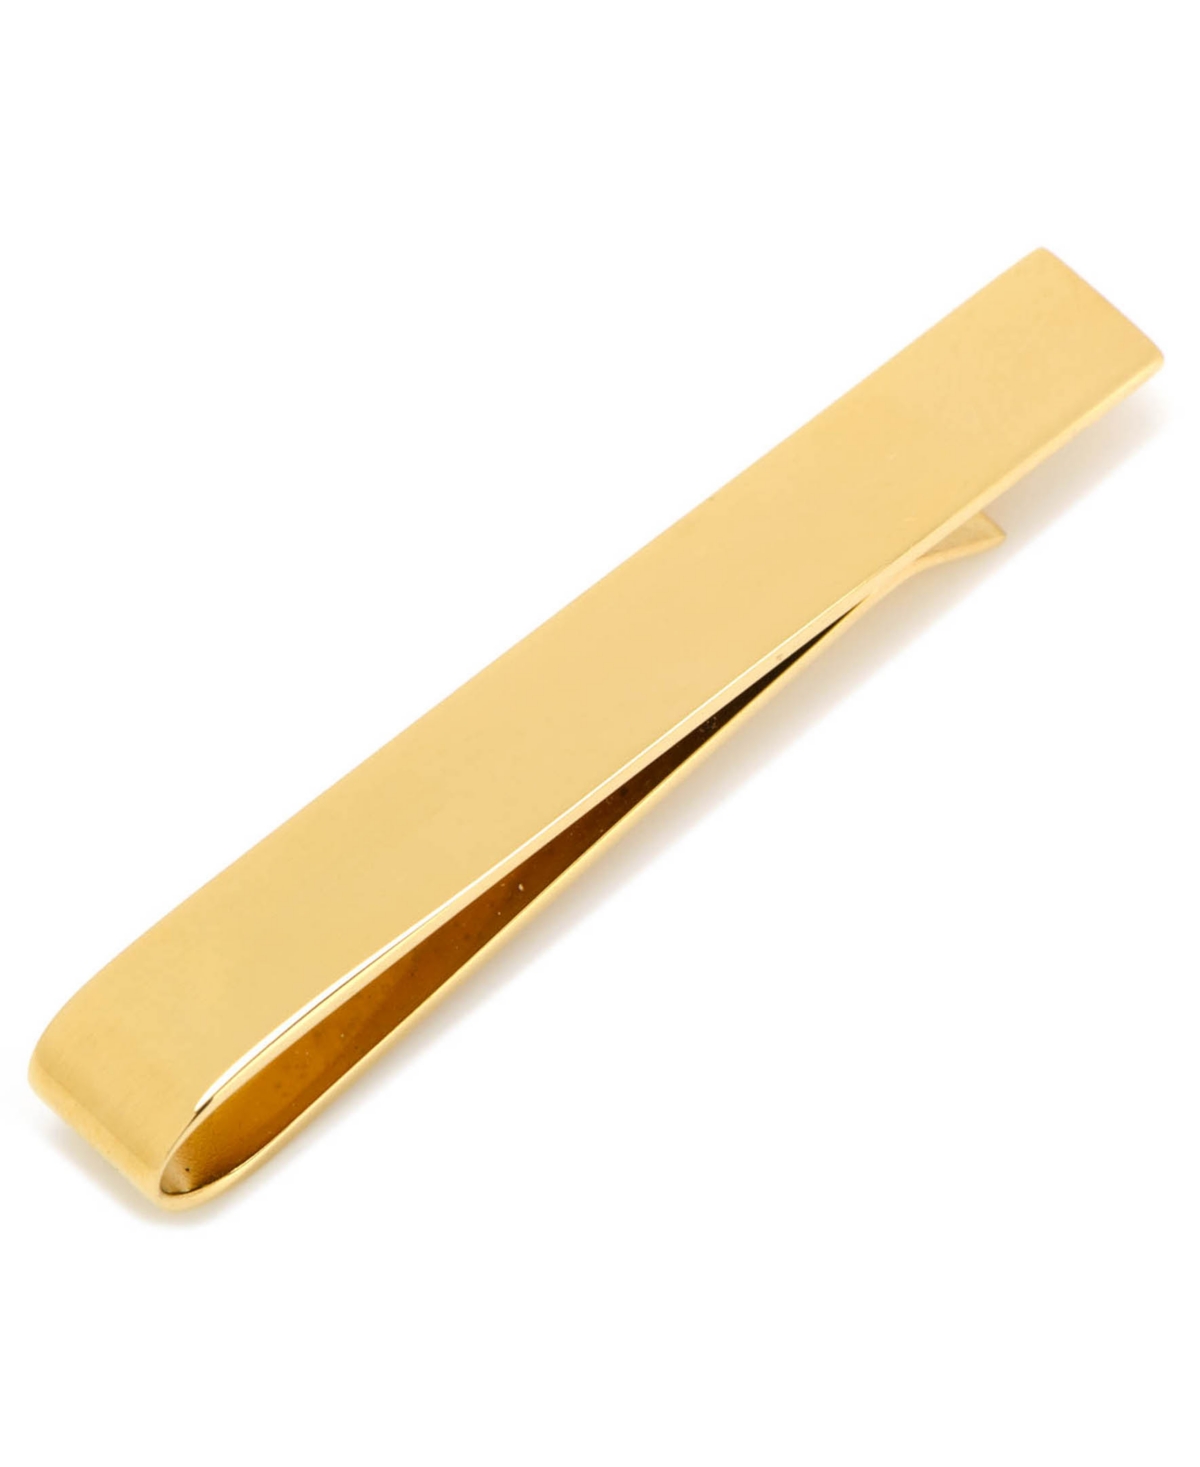 Ox and Bull Trading Co. Stainless Steel Engravable Tie Bar - Gold-Tone